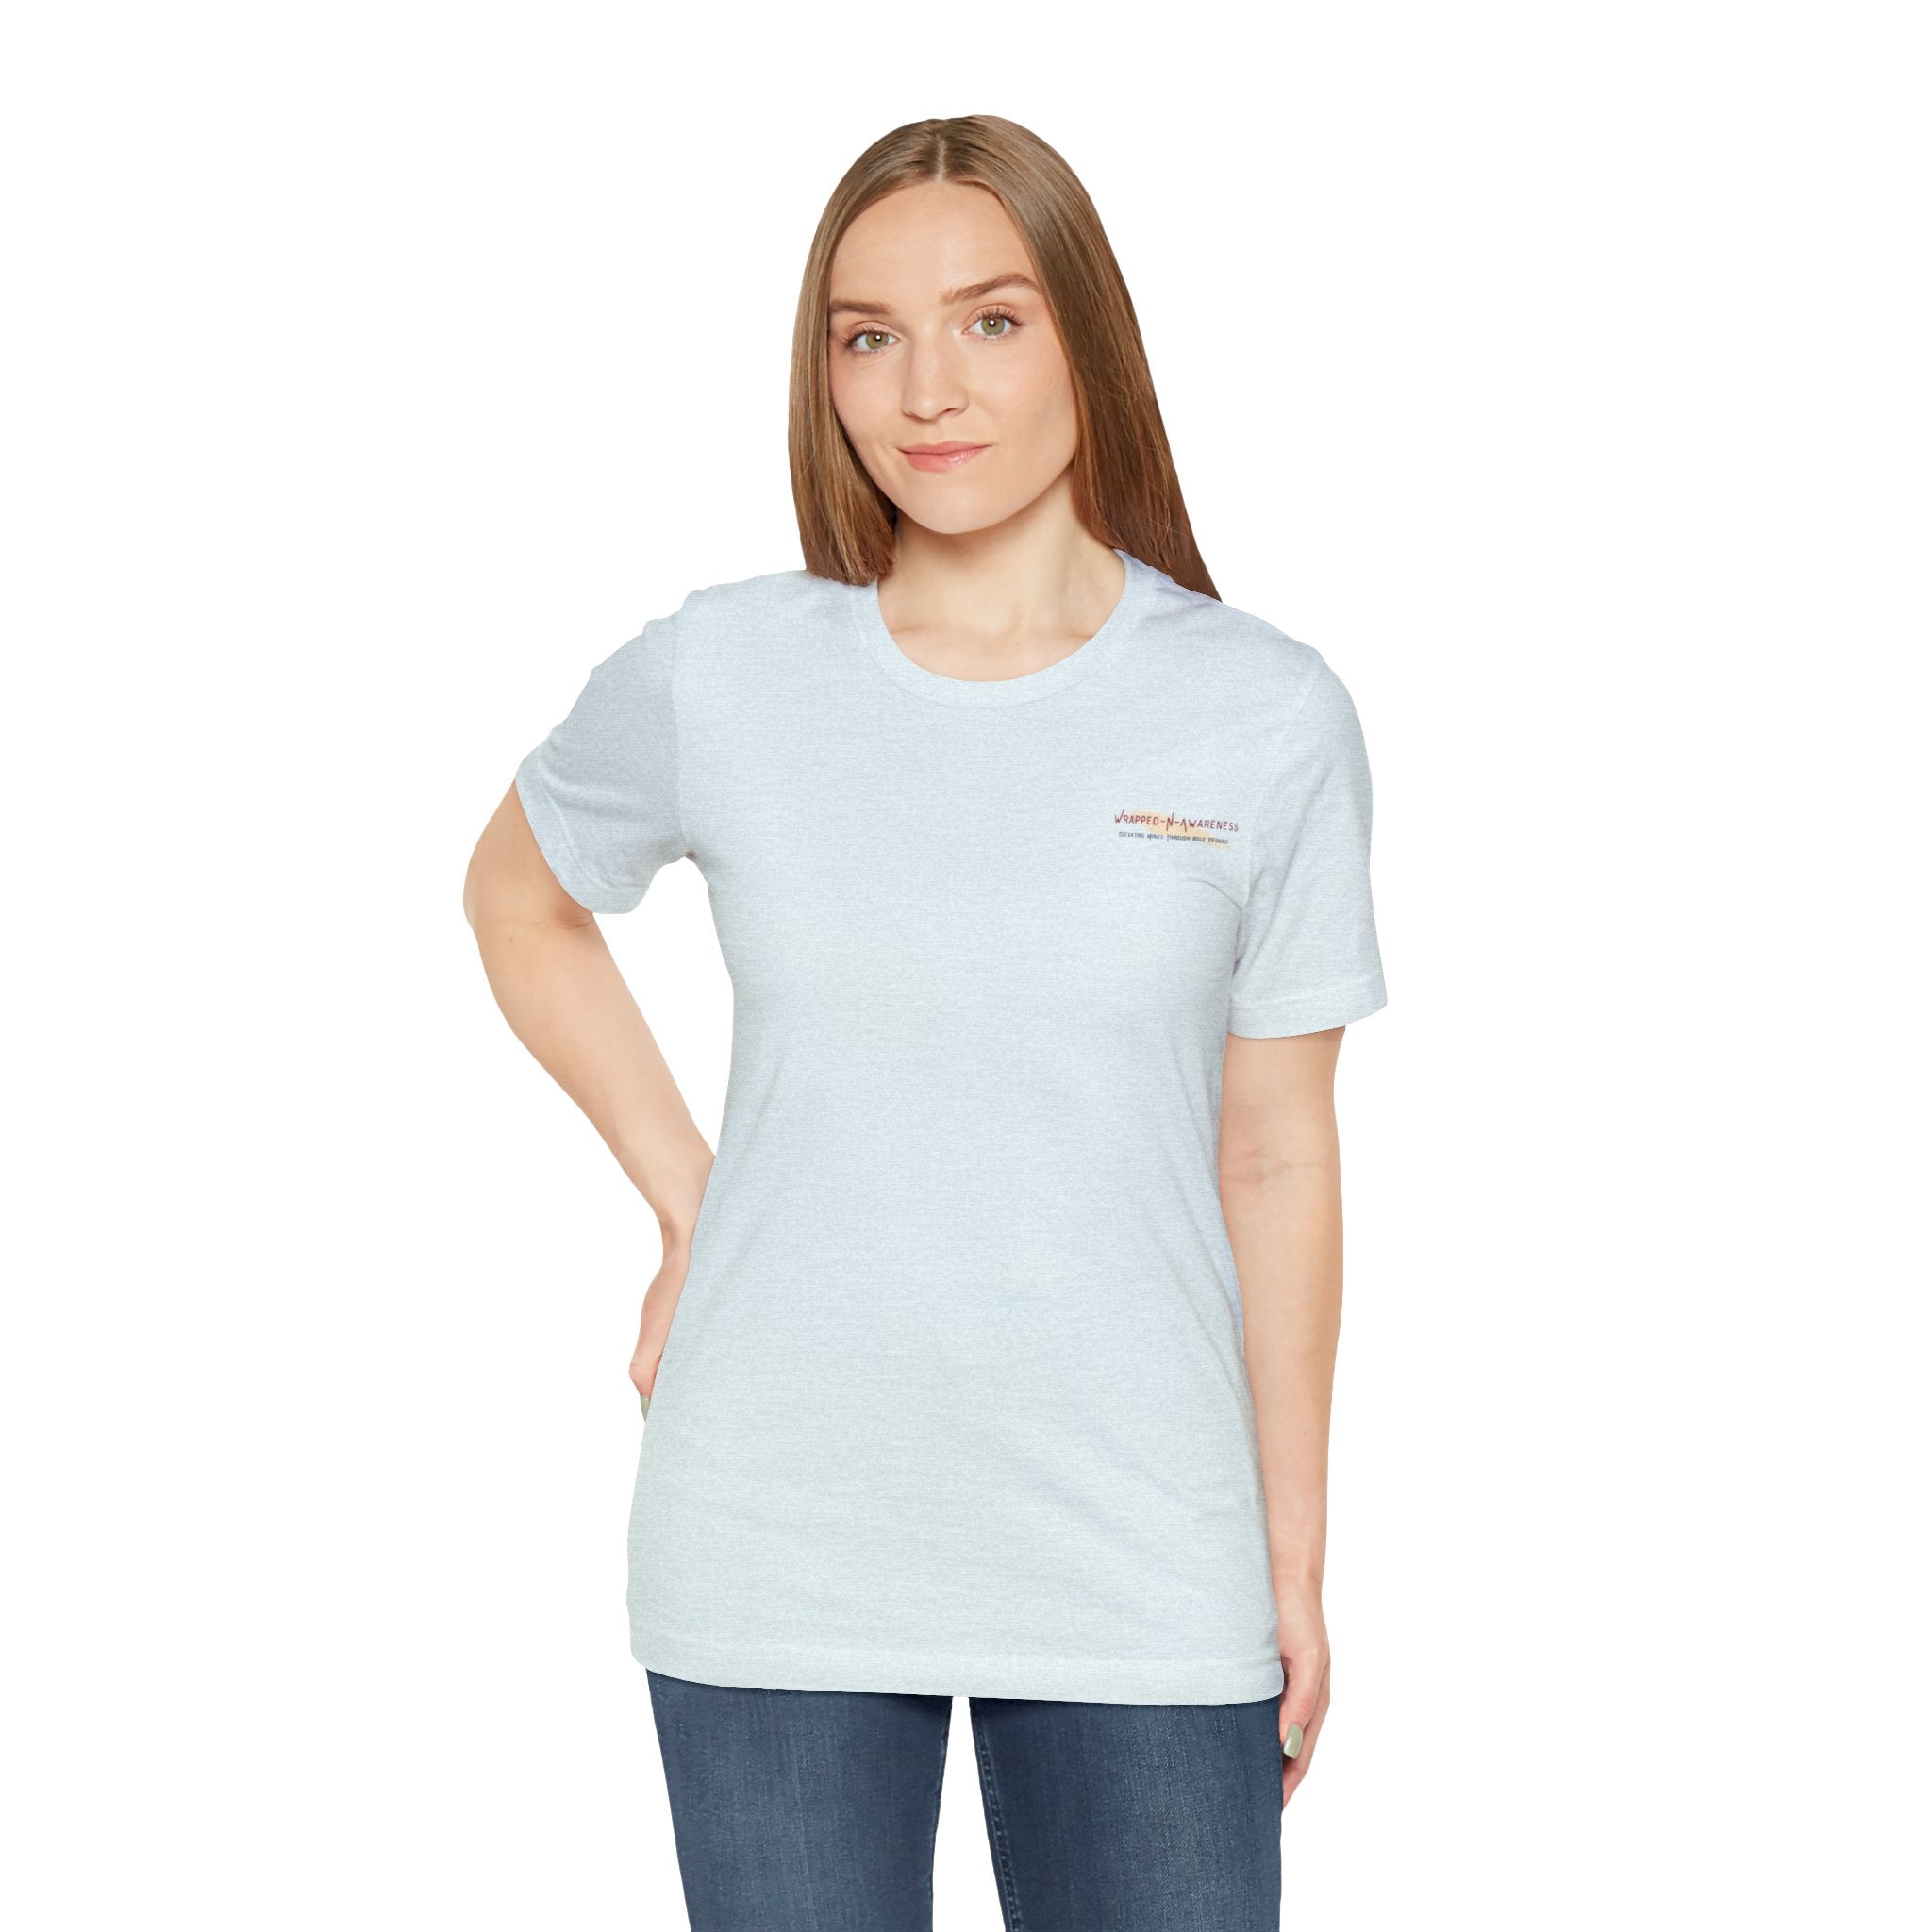 Hope Conquers Fear Jersey Tee - Bella+Canvas 3001 Heather Ice Blue Airlume Cotton Bella+Canvas 3001 Crew Neckline Jersey Short Sleeve Lightweight Fabric Mental Health Support Retail Fit Tear-away Label Tee Unisex Tee T-Shirt 10683842543013522114_2048 Printify